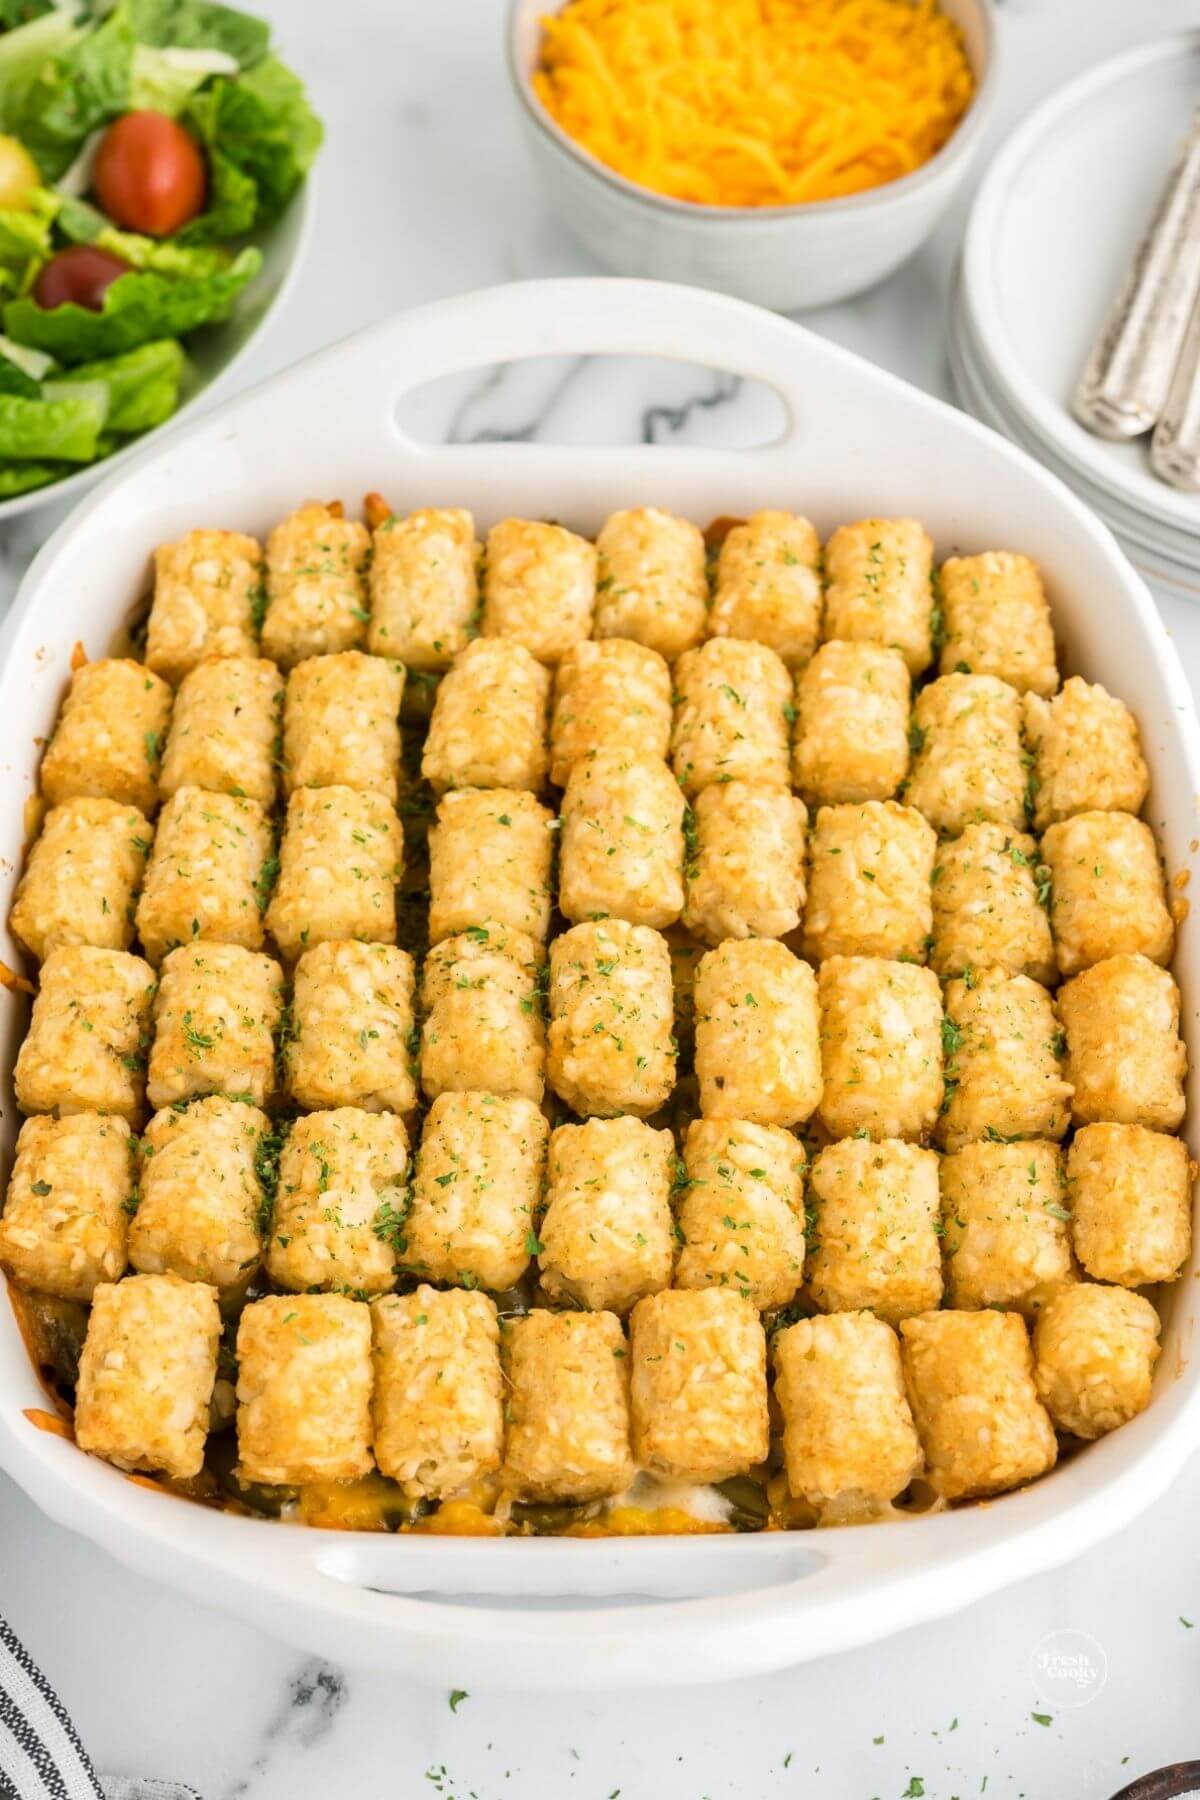 Tater tot casserole with salad in background, fresh from the oven.